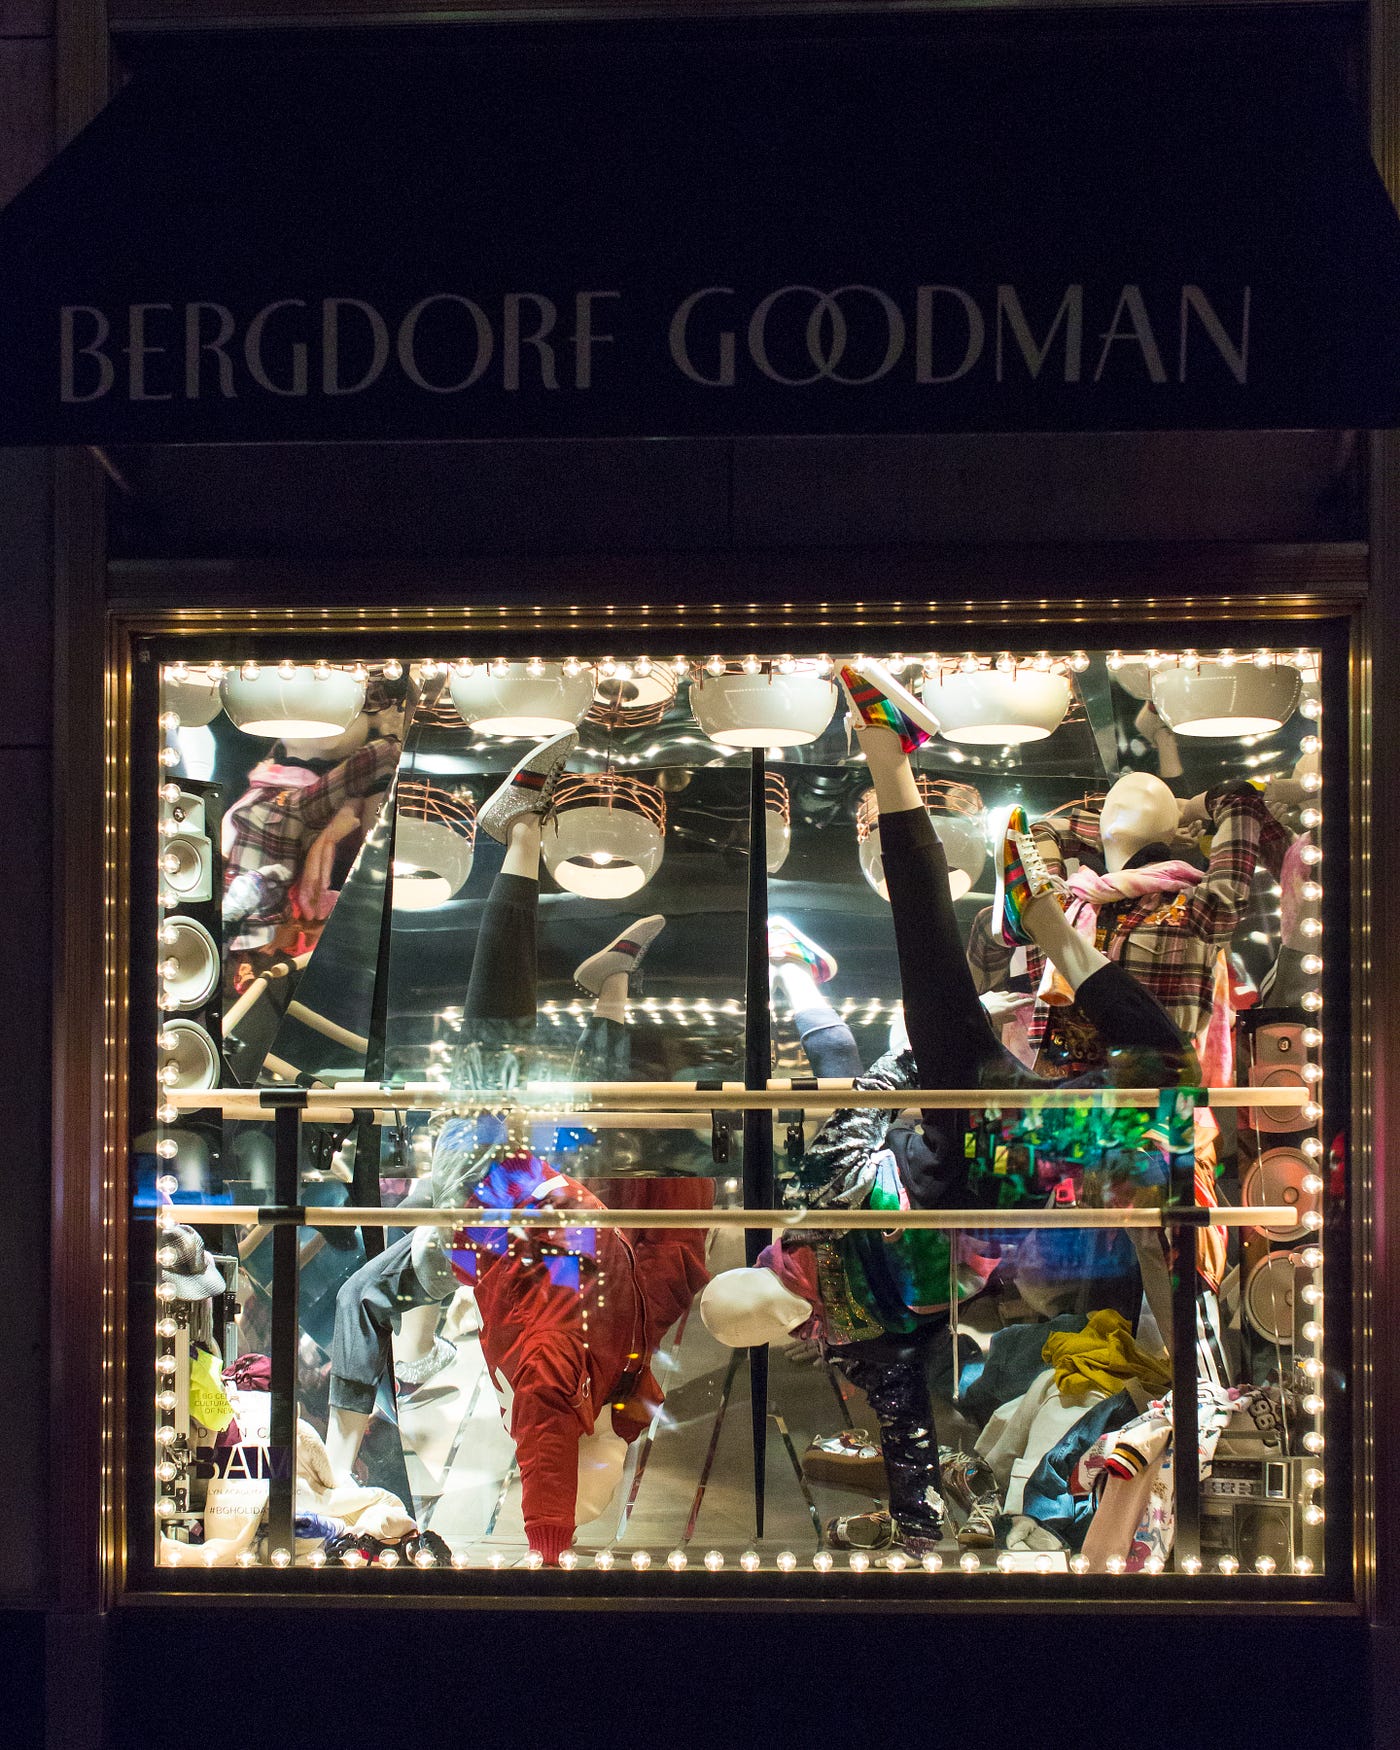 How David Hoey and Bergdorf Goodman Created The Ultimate Fantasy of New  York For Christmas, by The Muse at Clios.com